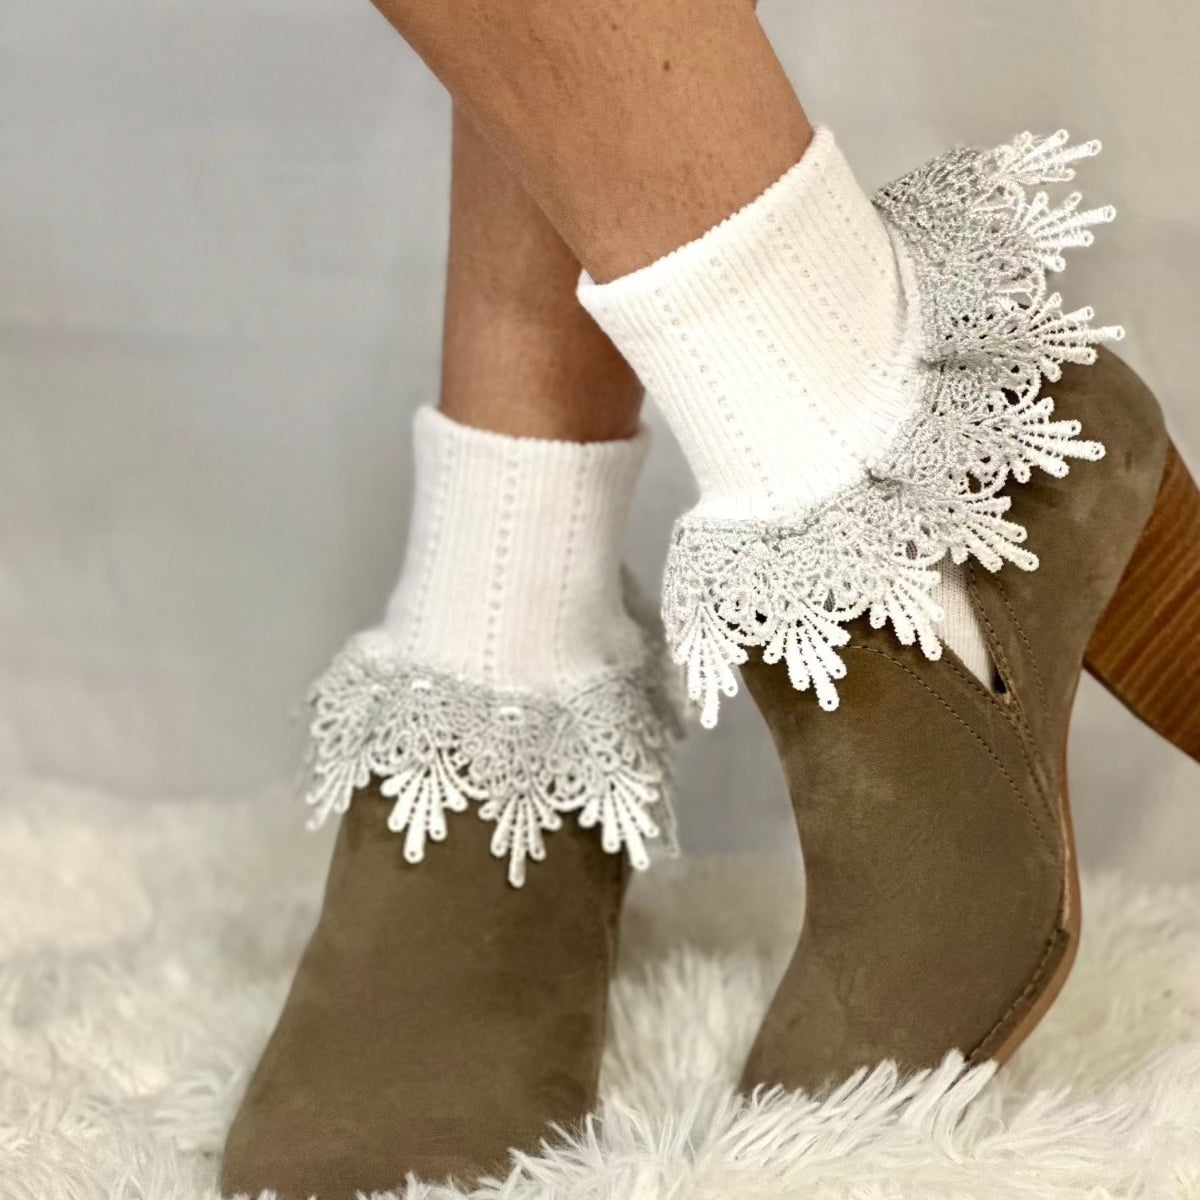 DOUBLE LACE holiday cuff socks - white silver